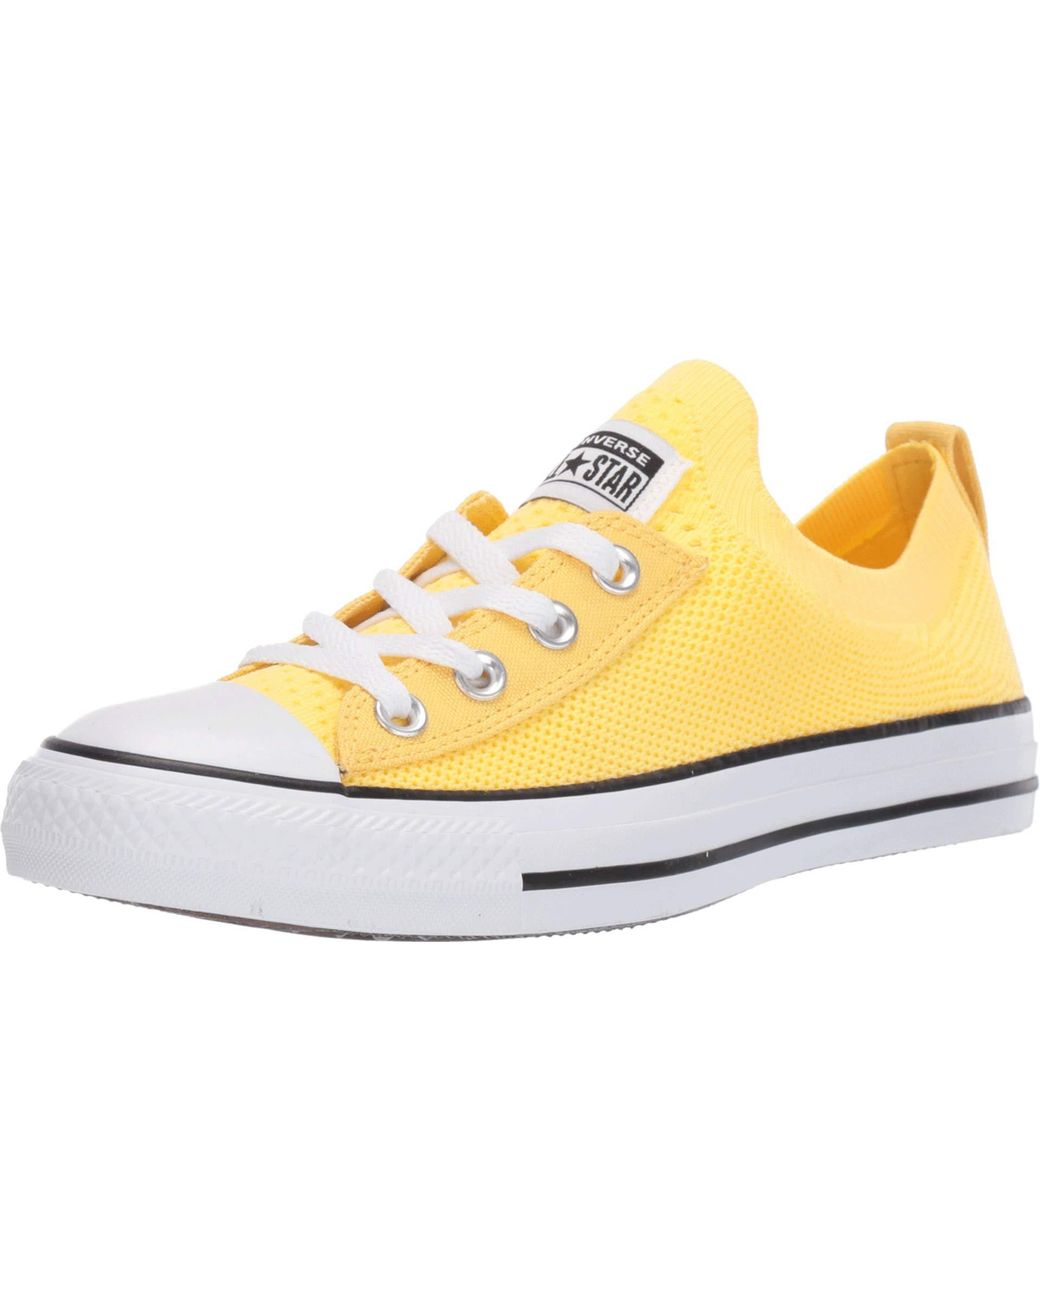 Converse Rubber Chuck Taylor Shoreline Knit Slip On Sneakers in Yellow |  Lyst